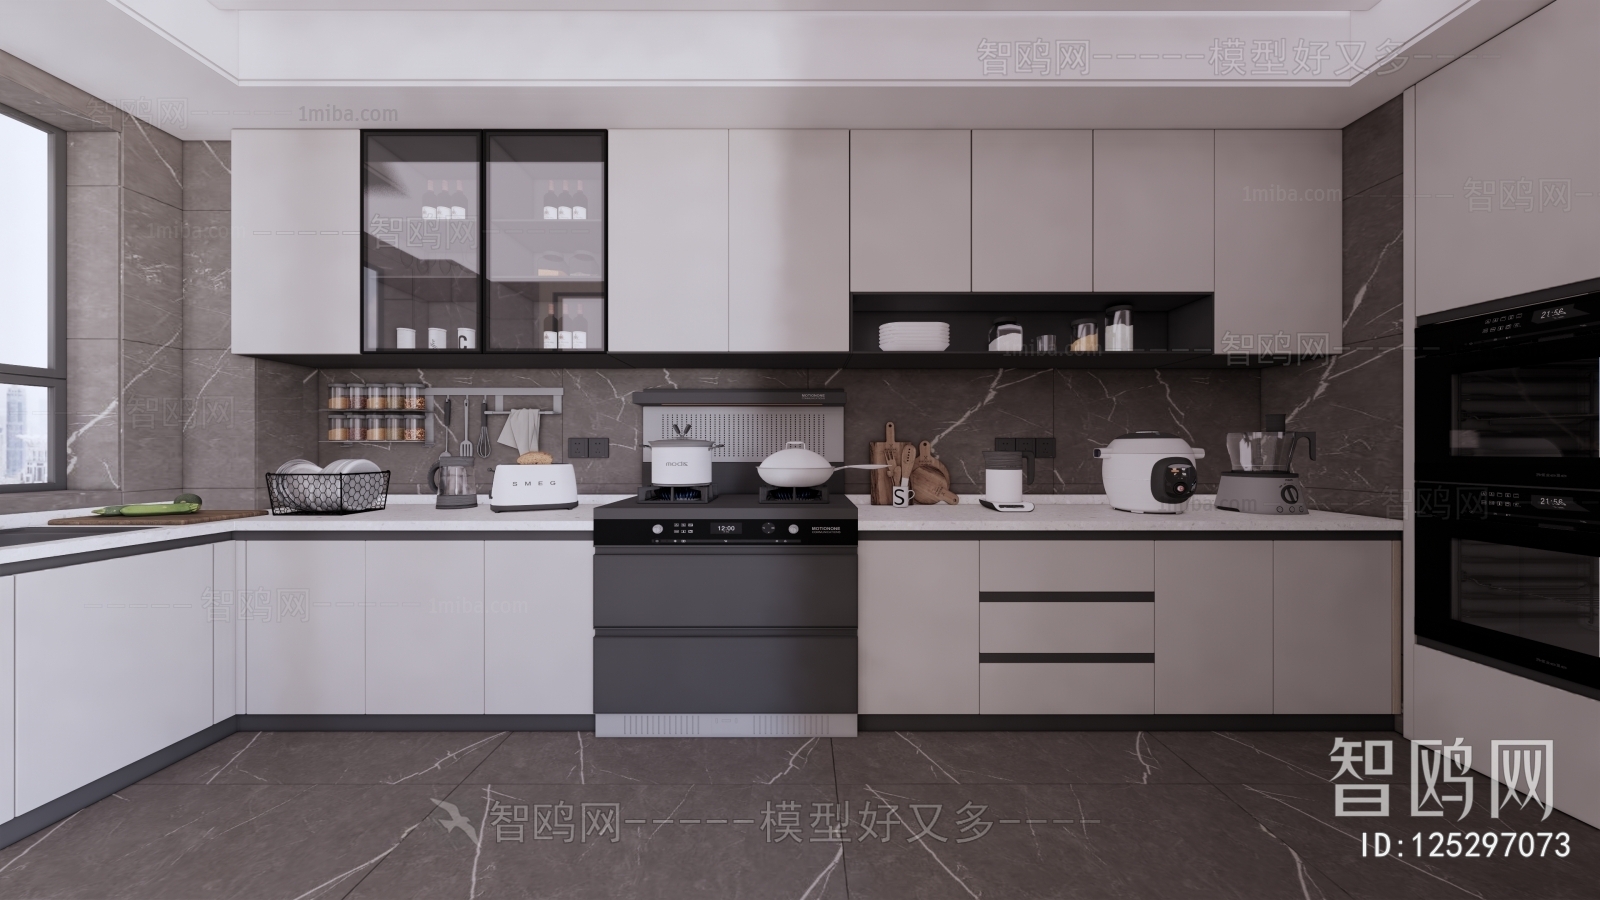 Modern The Kitchen sketchup Model Download - Model ID.125297073 | 1miba